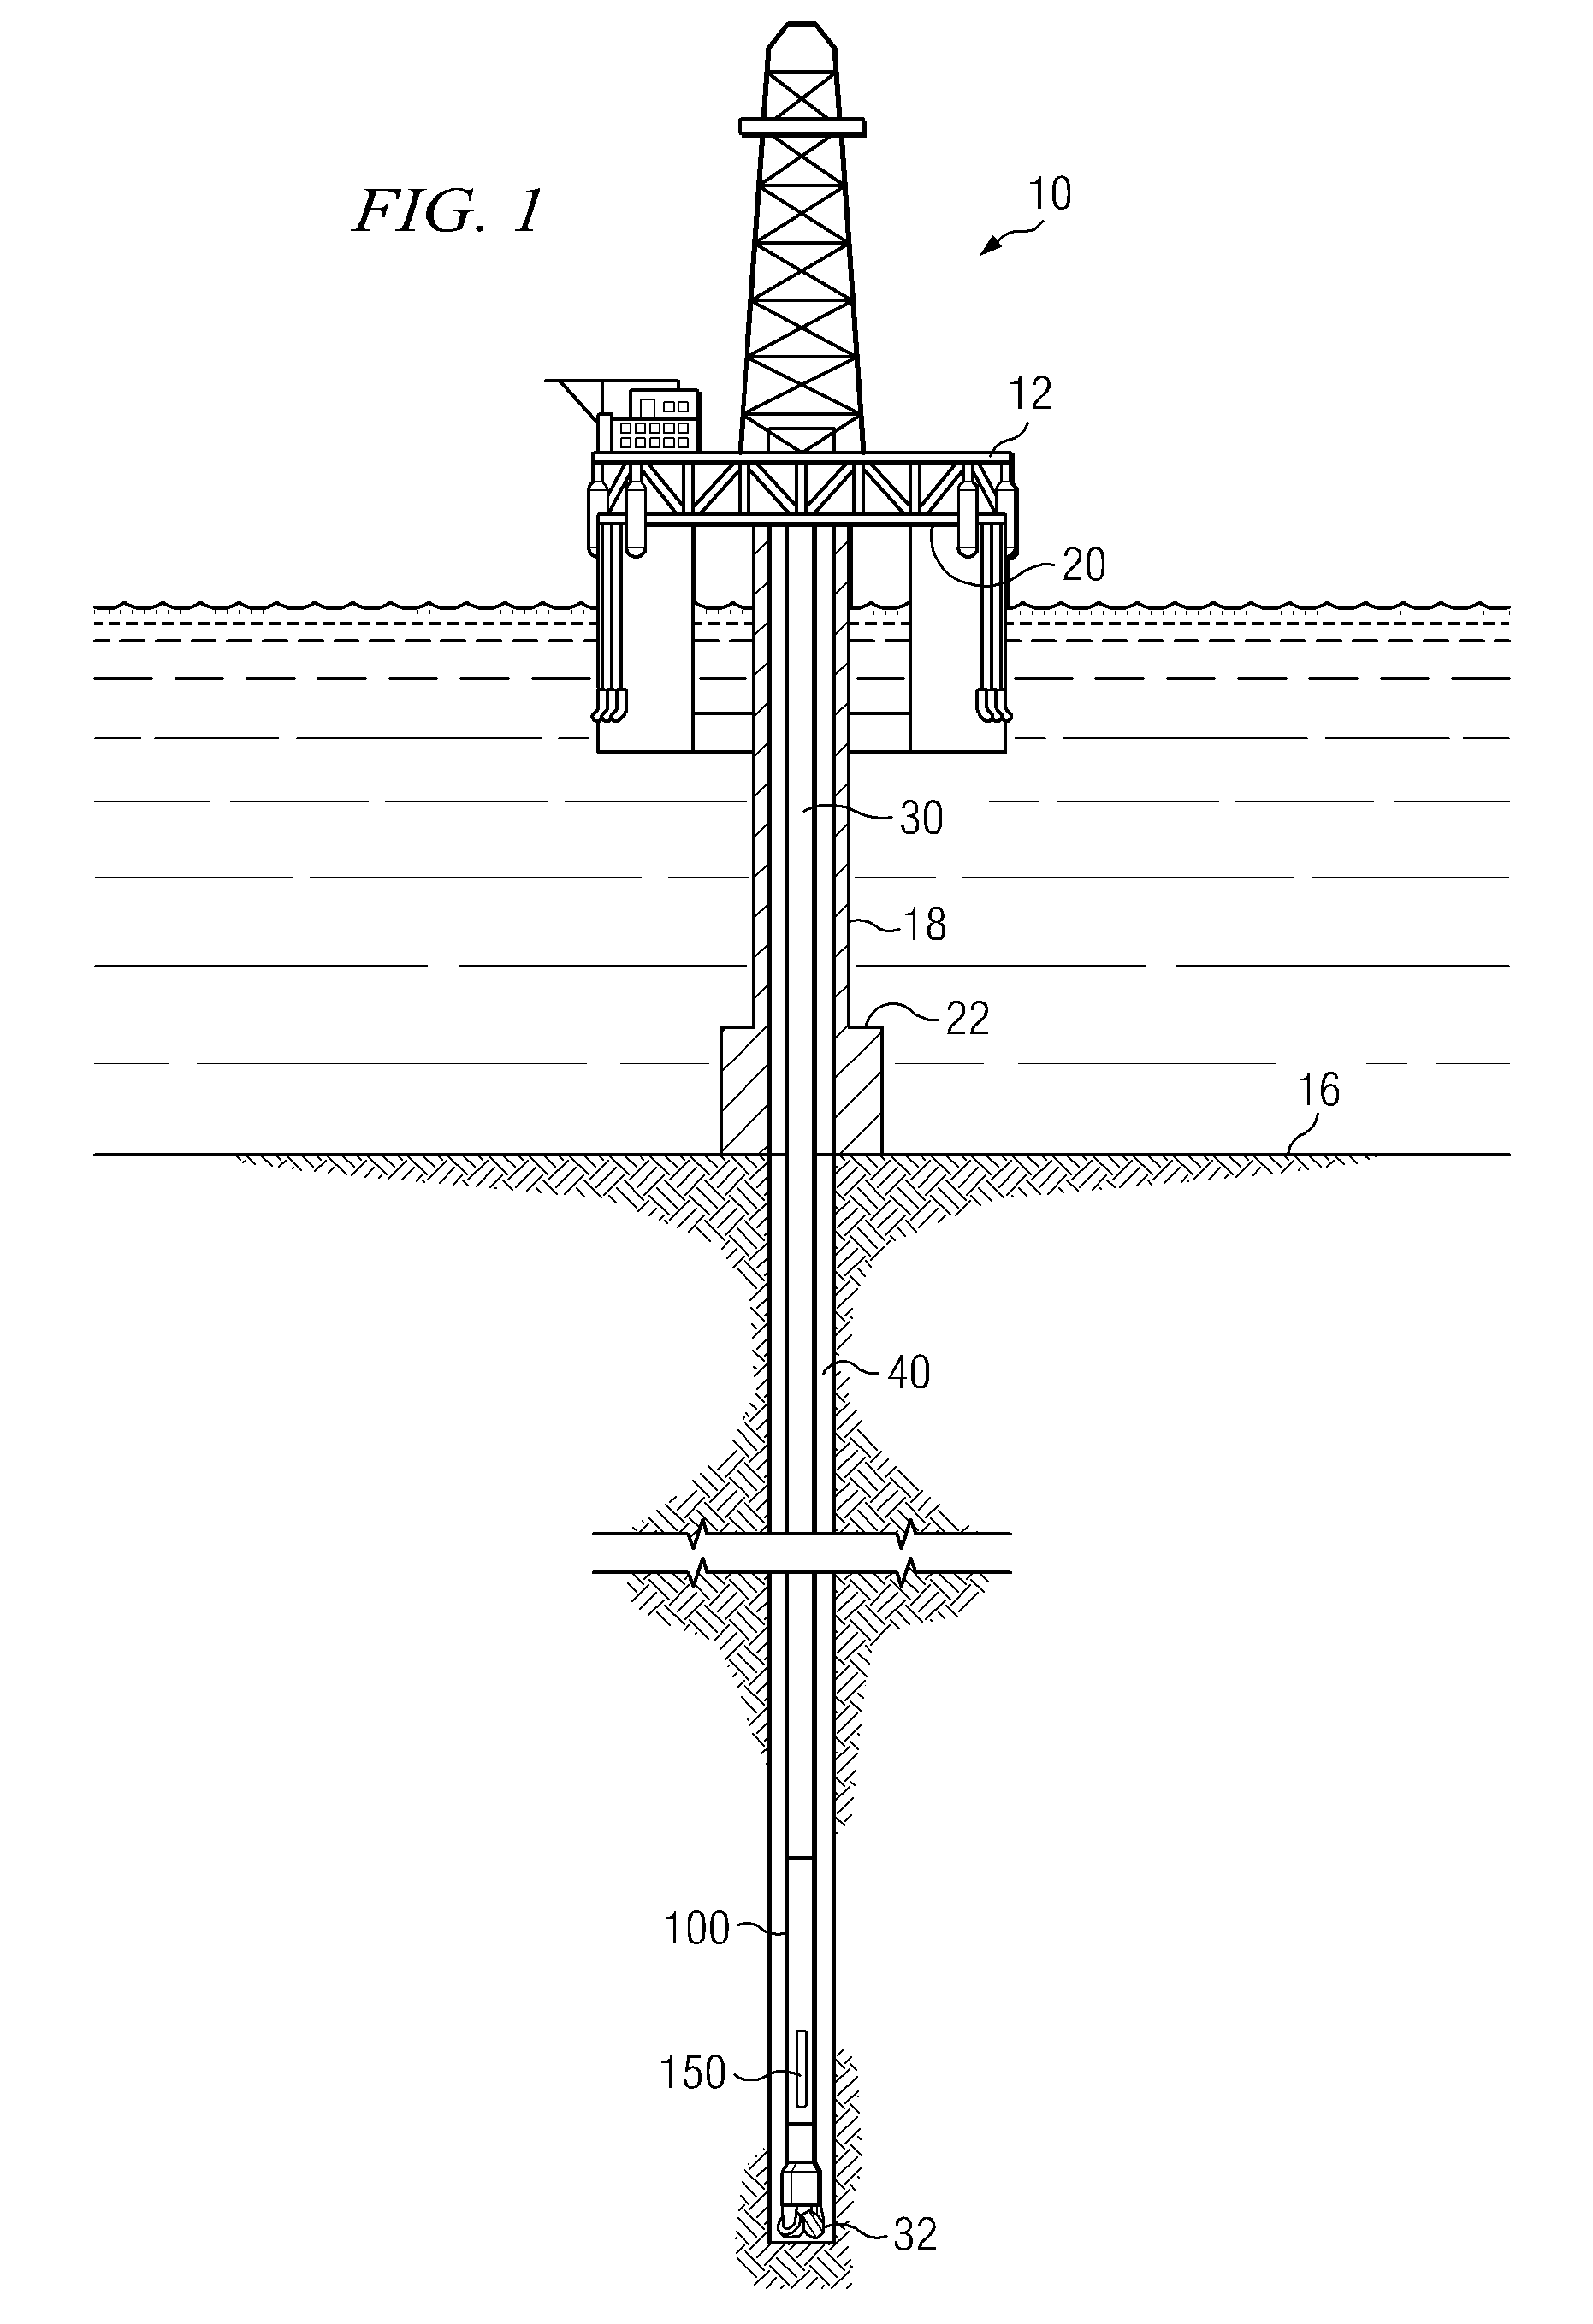 Rotary Steerable Tool Employing a Timed Connection